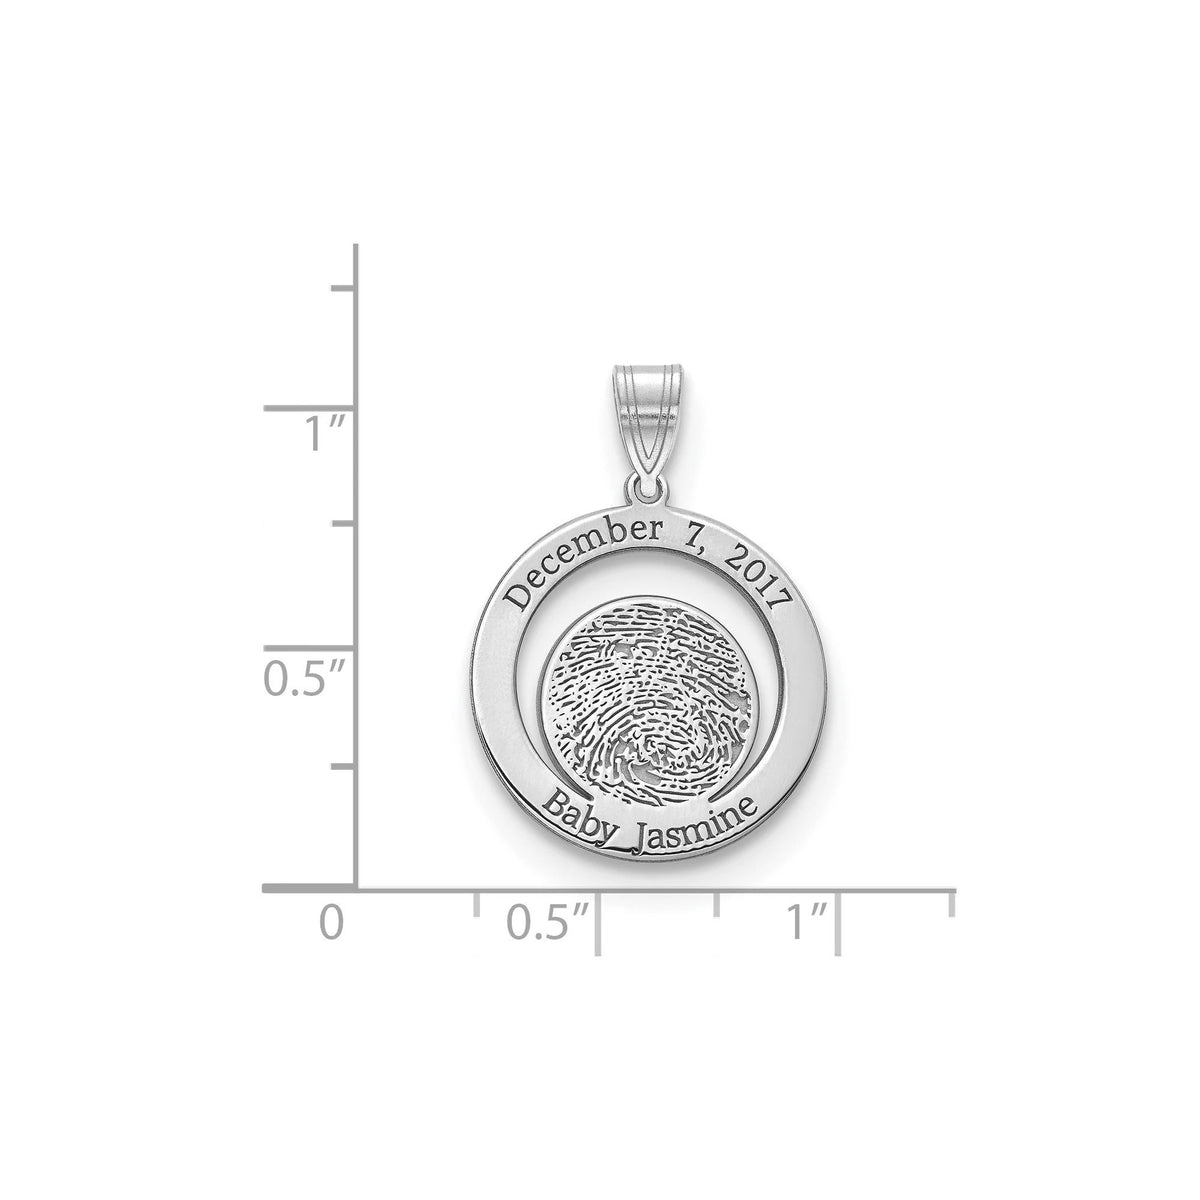 Personalized Baby Fingerprint & Birthdate Pendant with Necklace - Gift Box Included - Made in USA